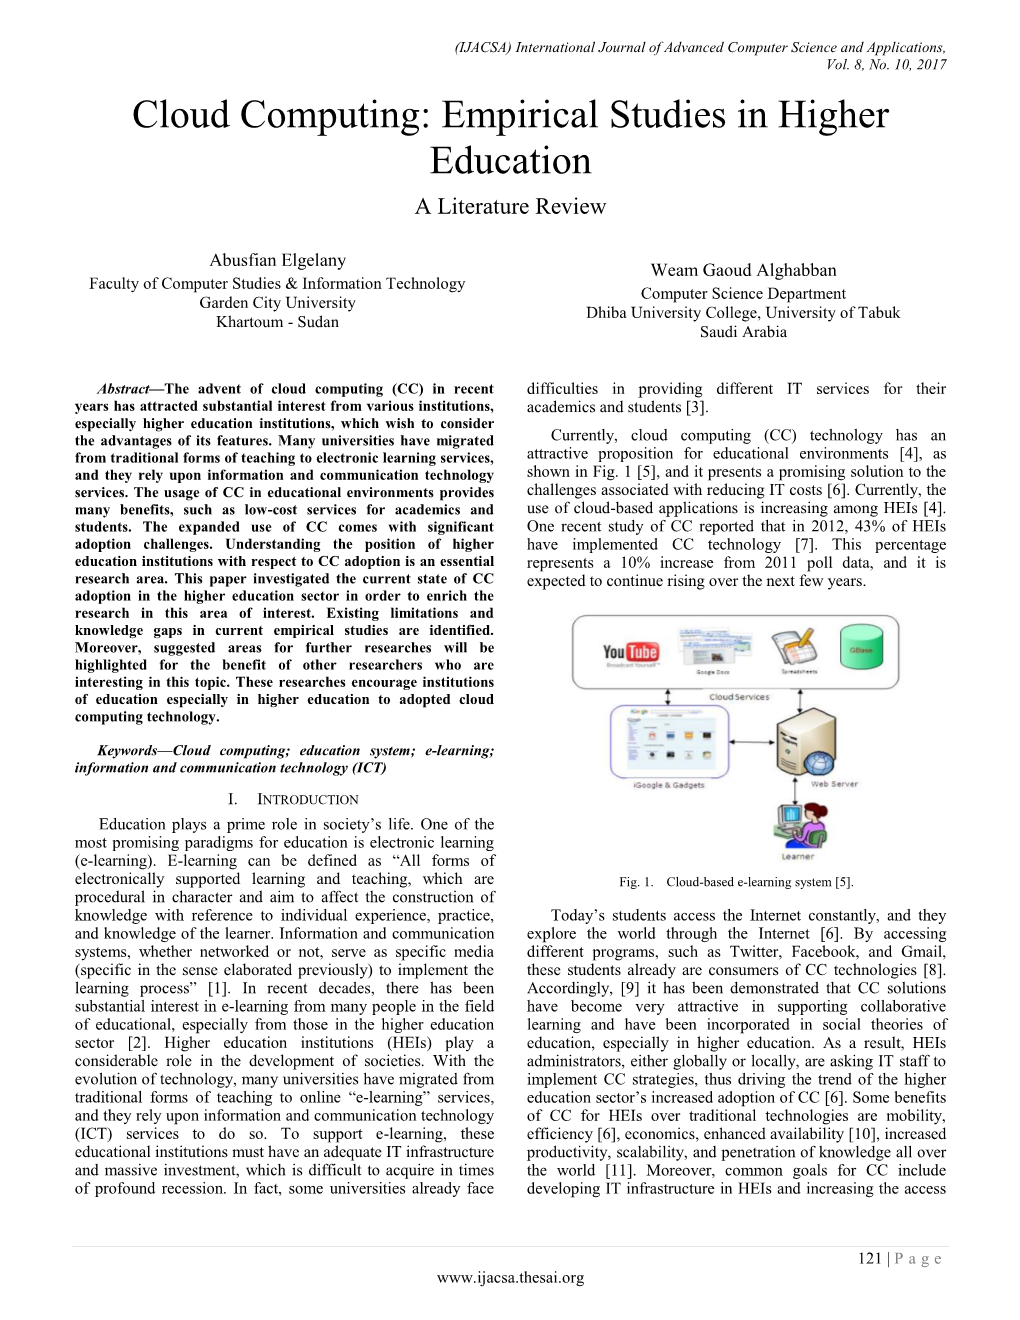 Cloud Computing: Empirical Studies in Higher Education a Literature Review